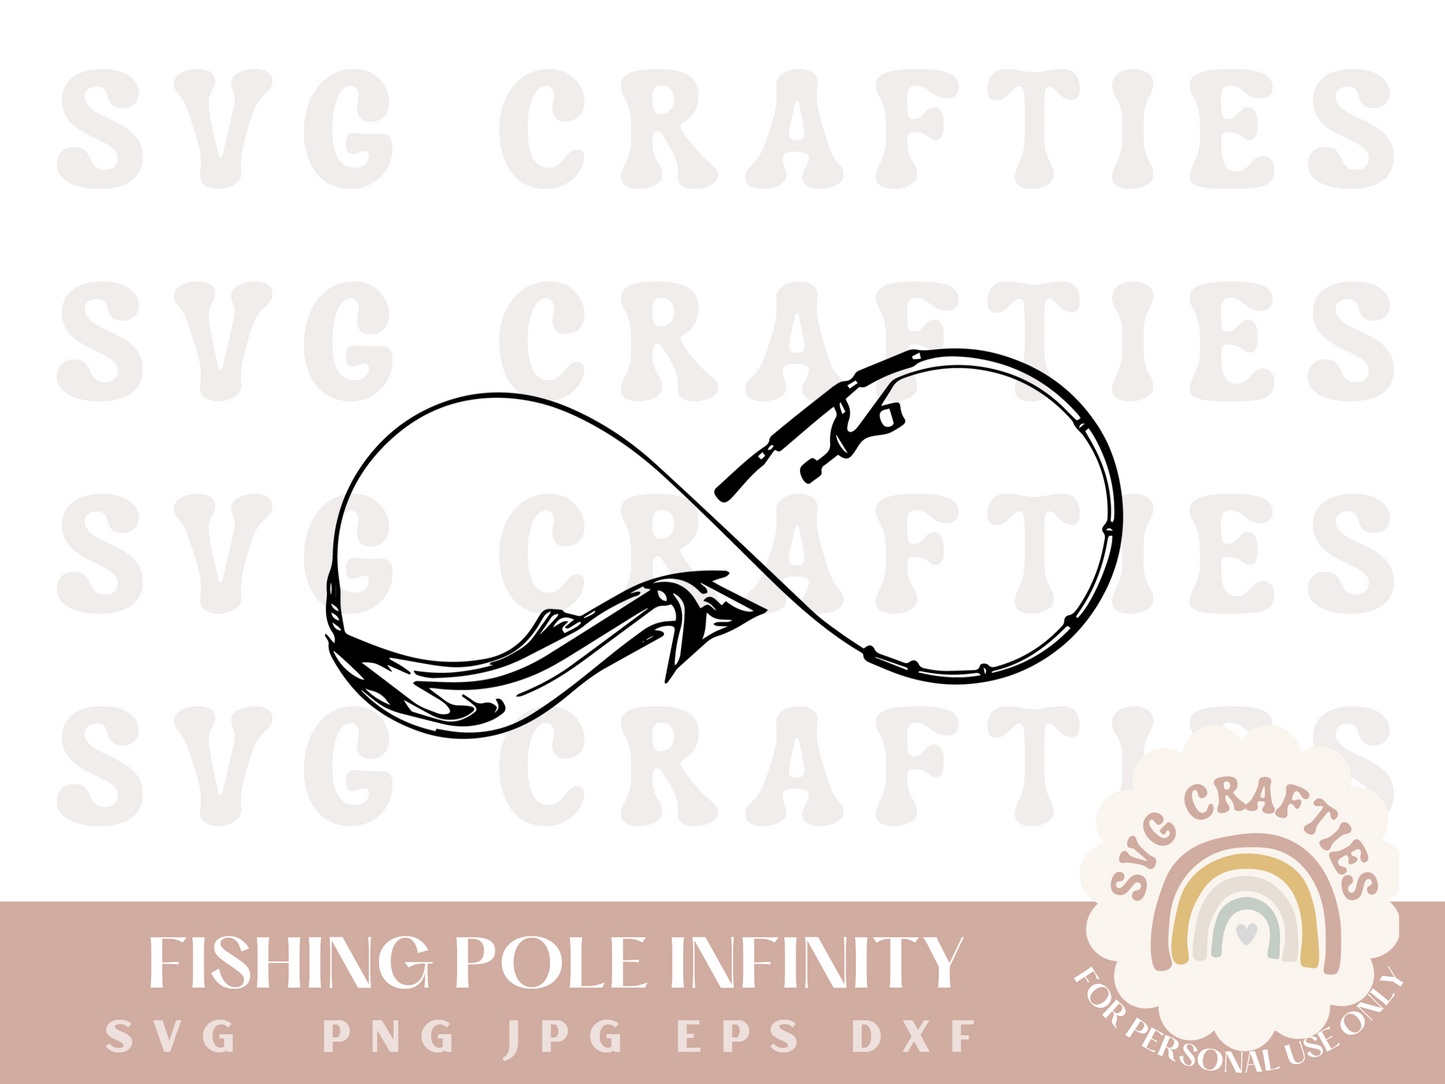 Fishing Pole Infinity Free SVG Download